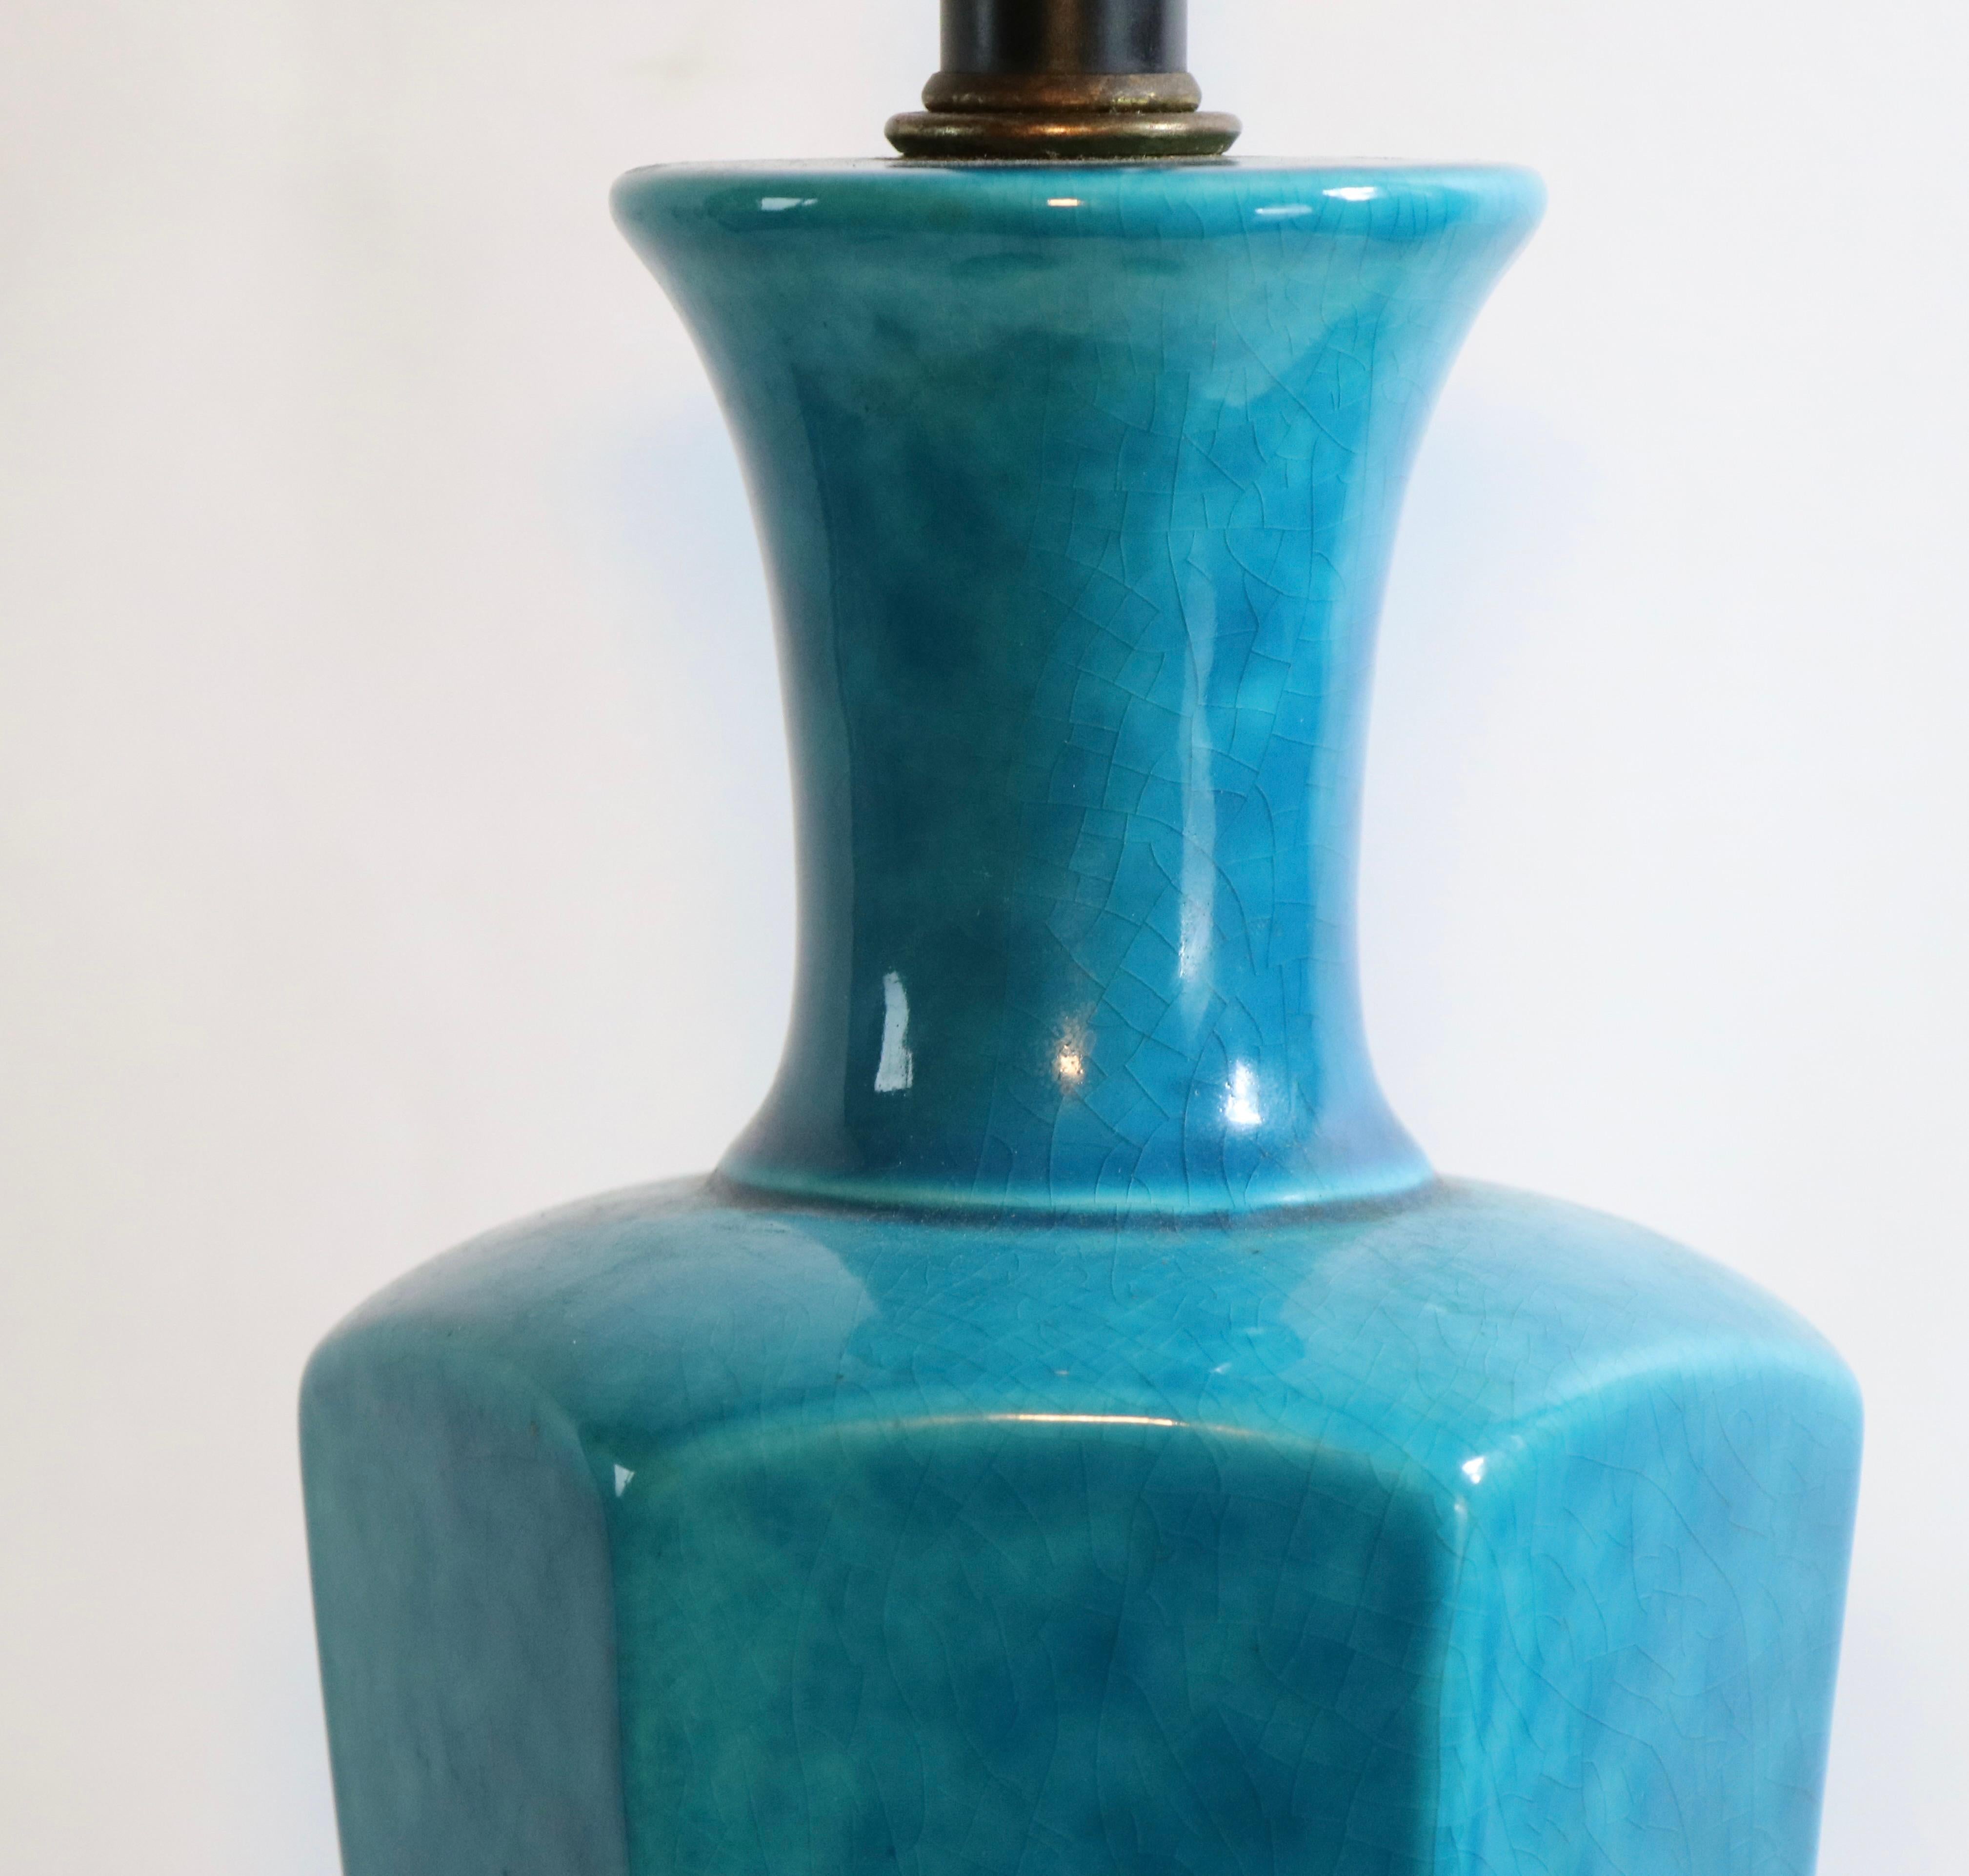 20th Century Asia Modern Chinese Style Table Lamp in Blue Craquelure Glaze Finish